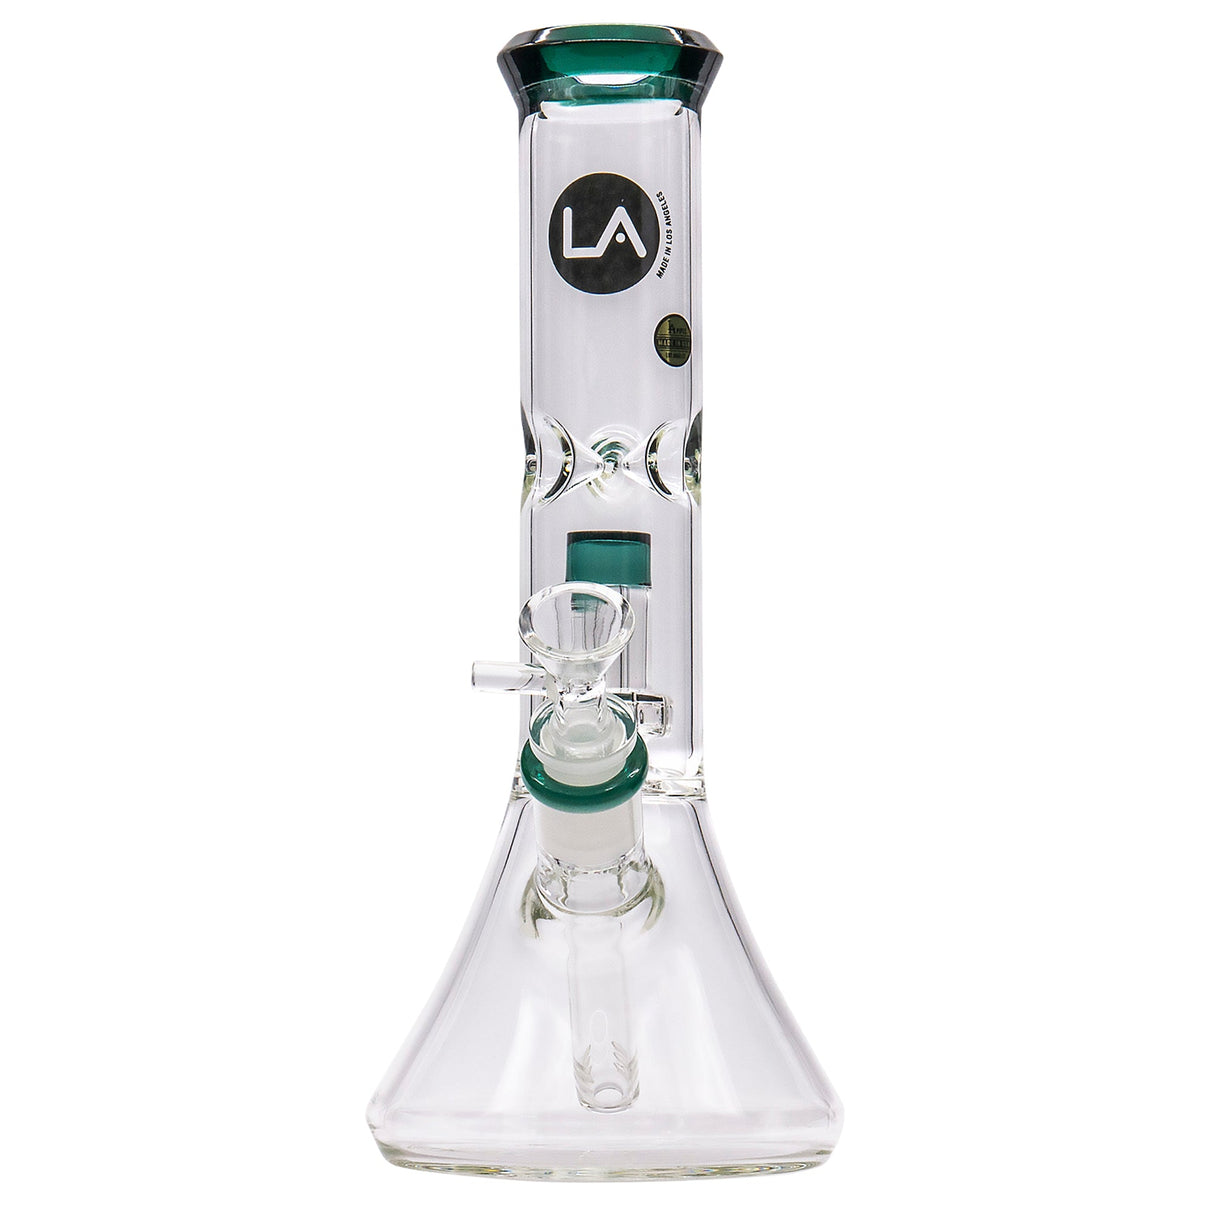 LA Pipes "Vector" Beaker Bong with Shower-Head Perc, Clear Borosilicate Glass, Front View